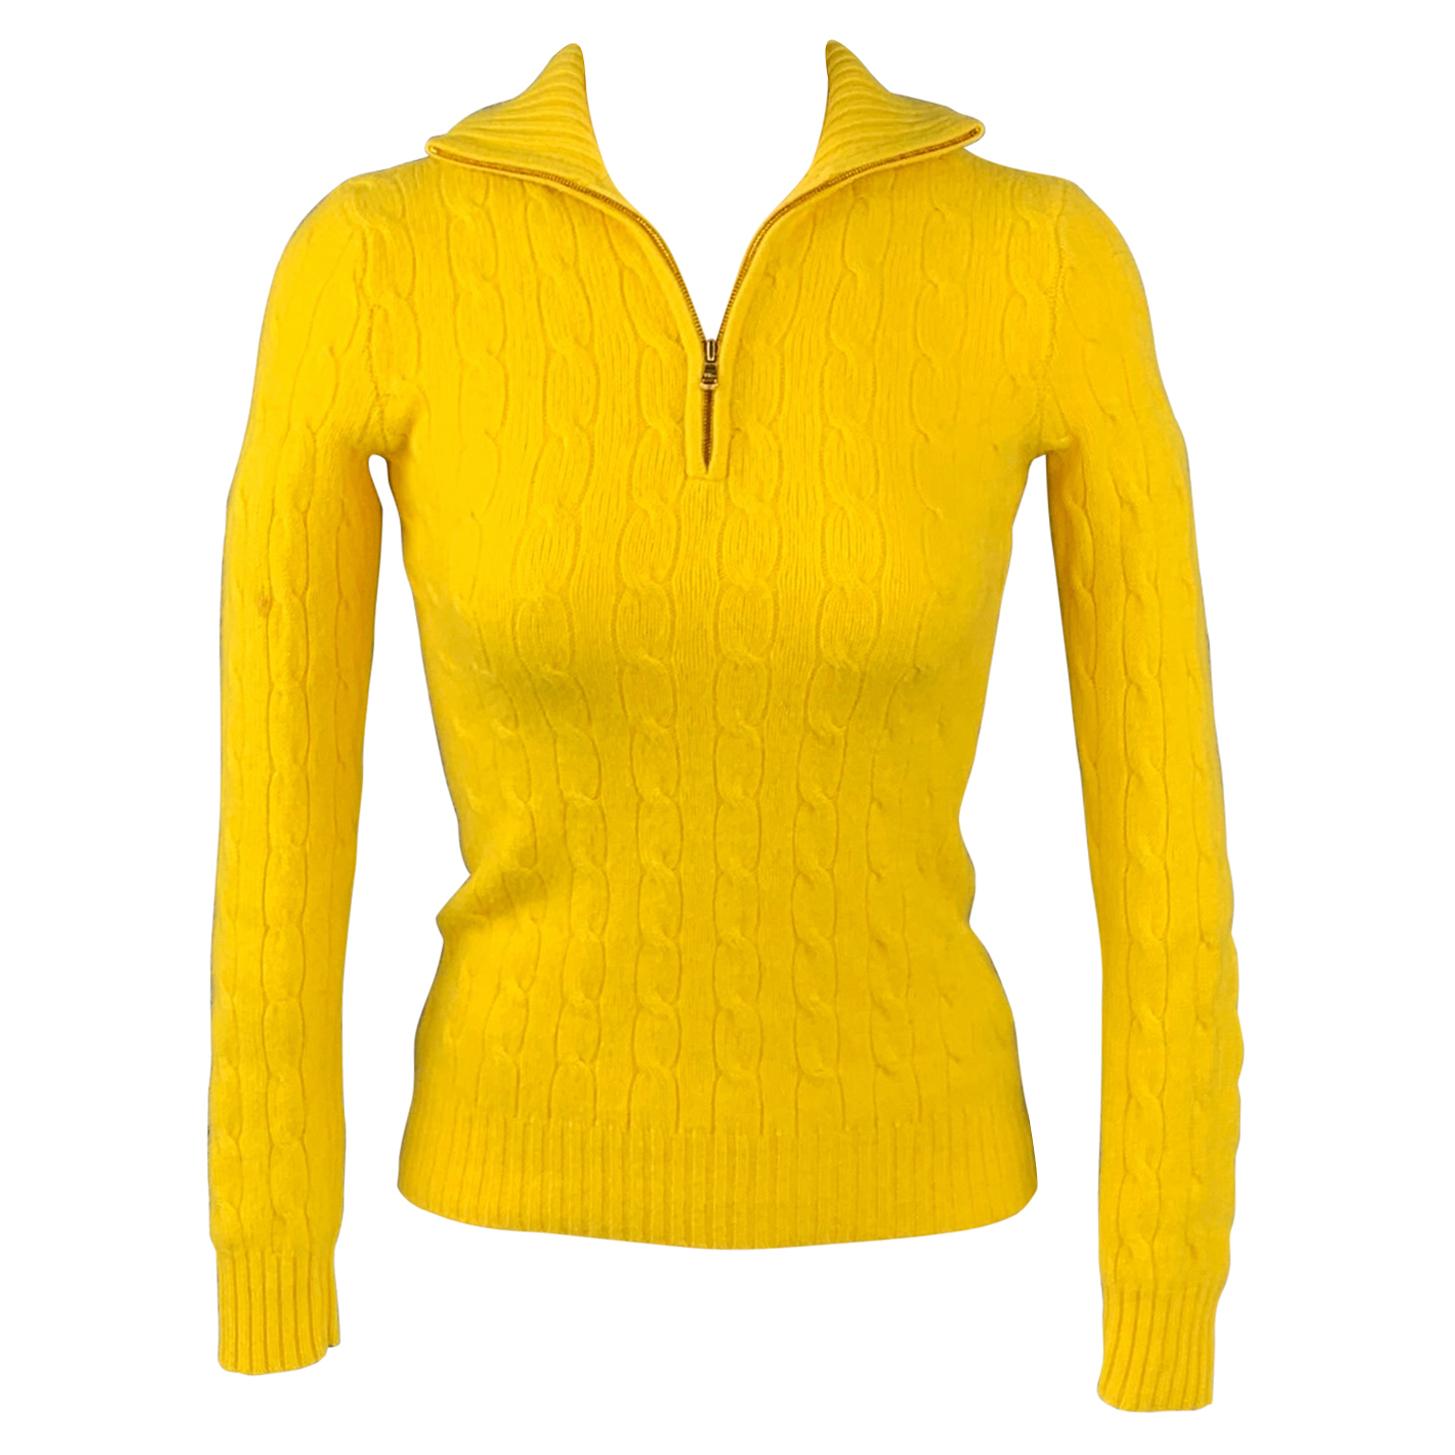 RALPH LAUREN Black Label Size XS Yellow Knitted Cashmere Sweater